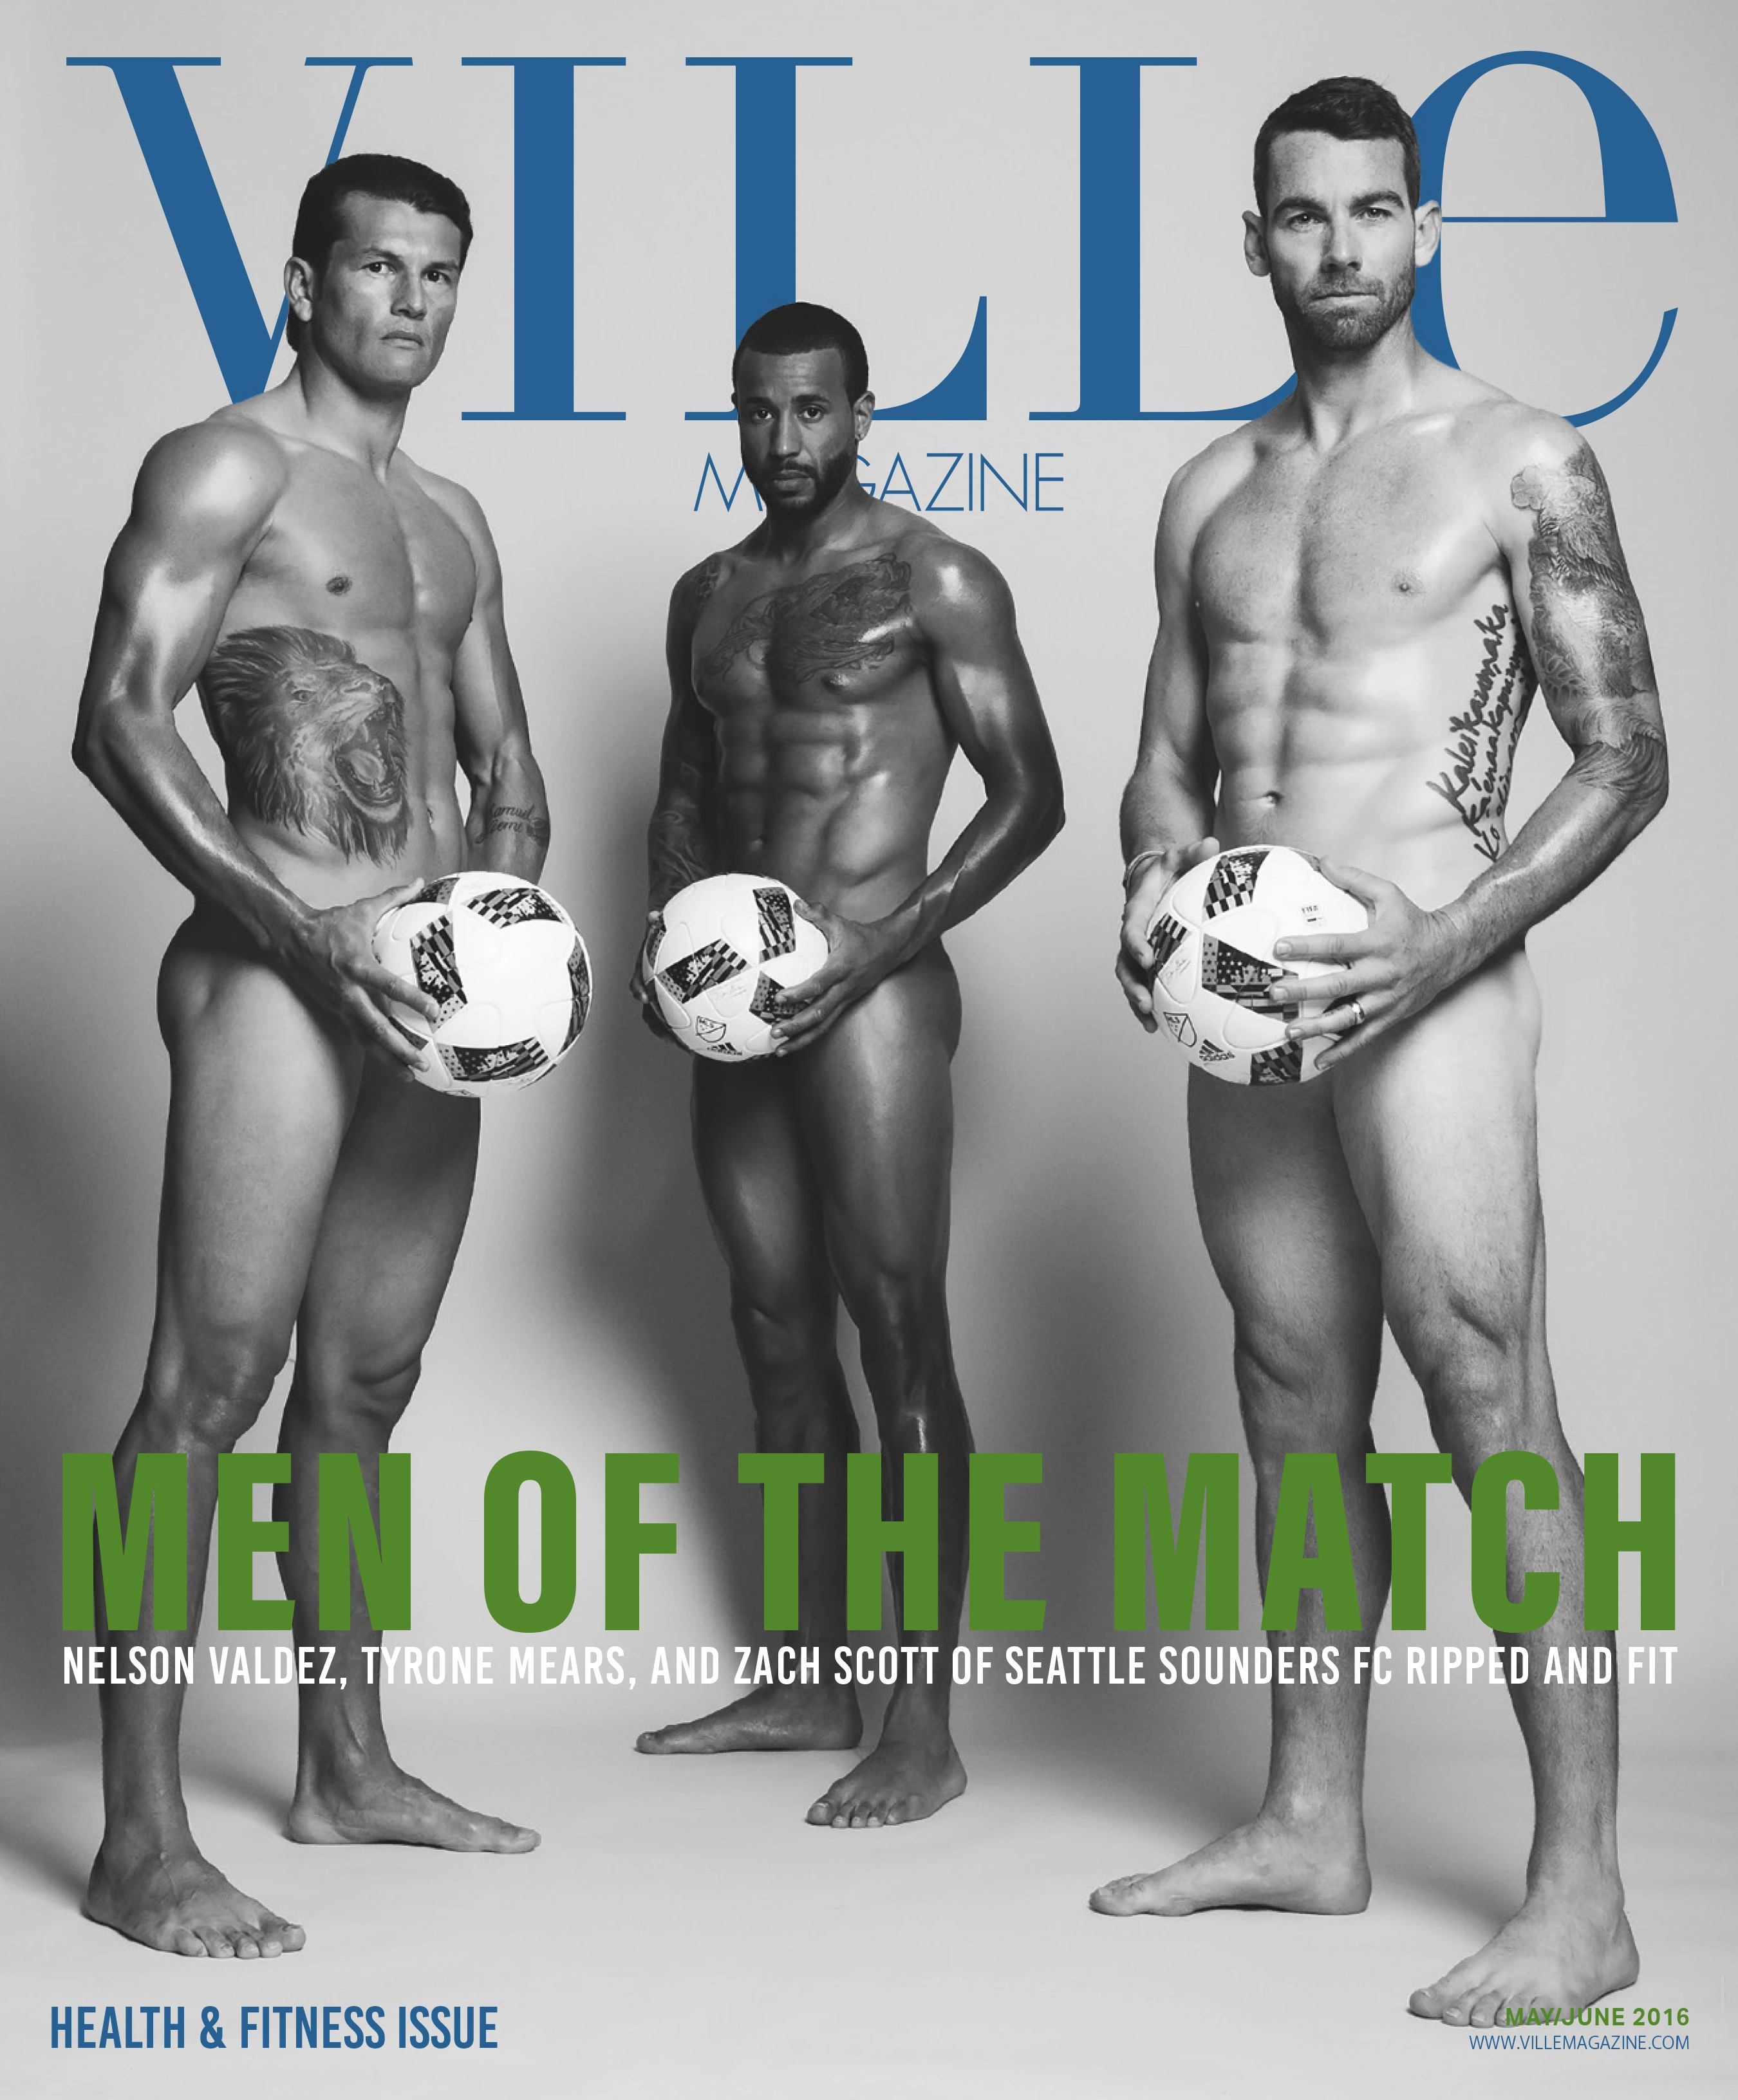 Ville - "Men of the Match," May/June